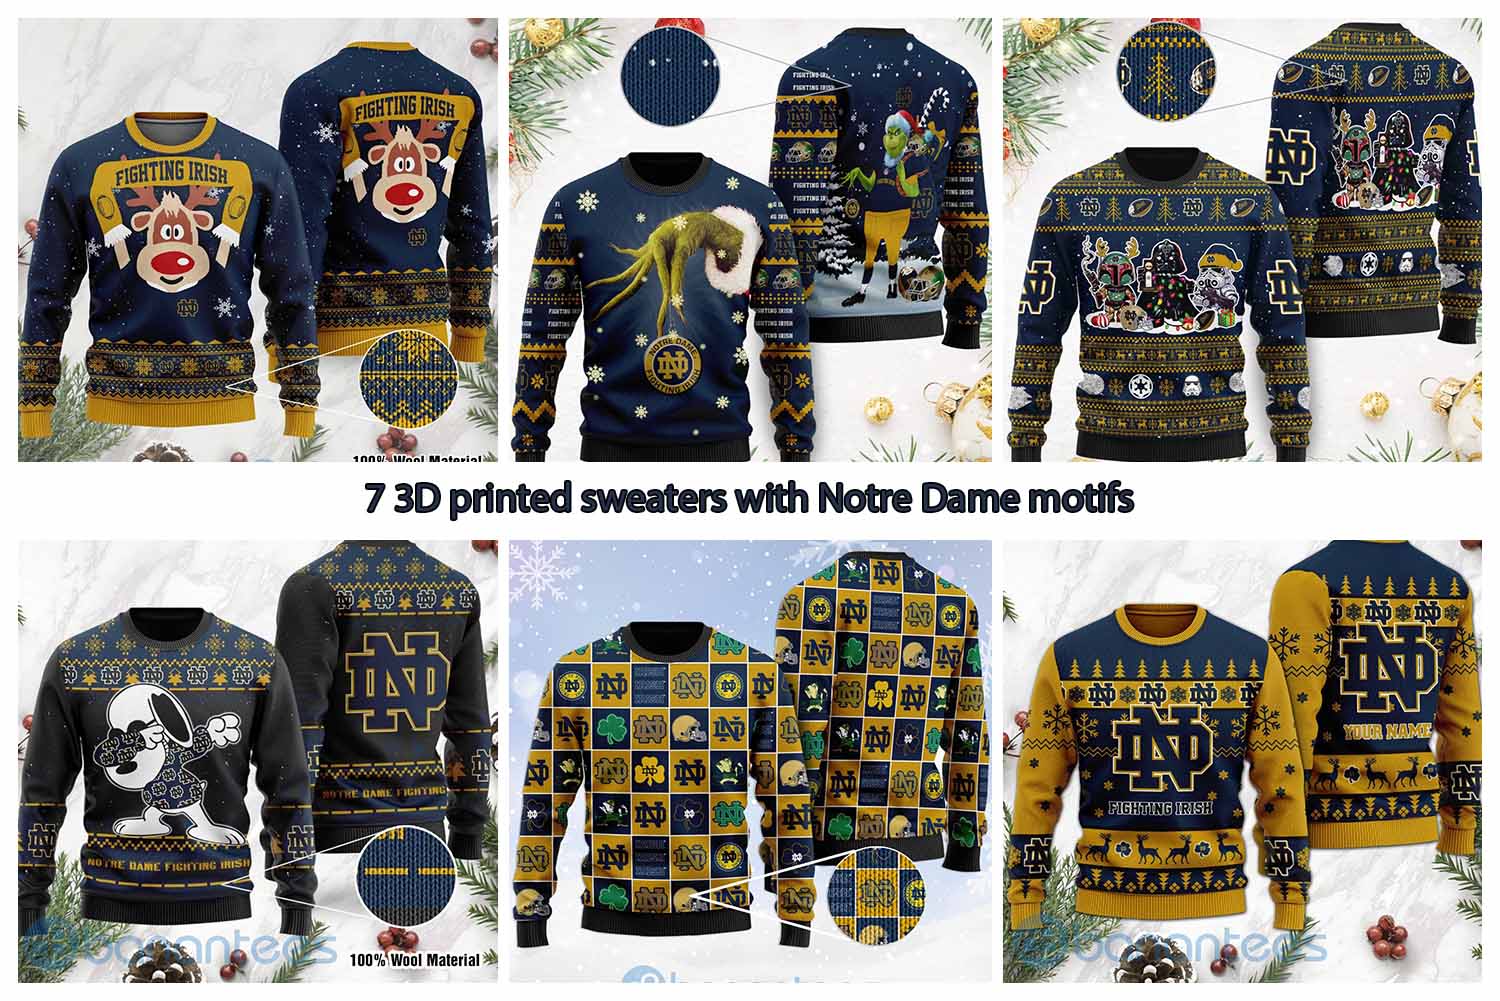 7 3D printed sweaters with Notre Dame motifs